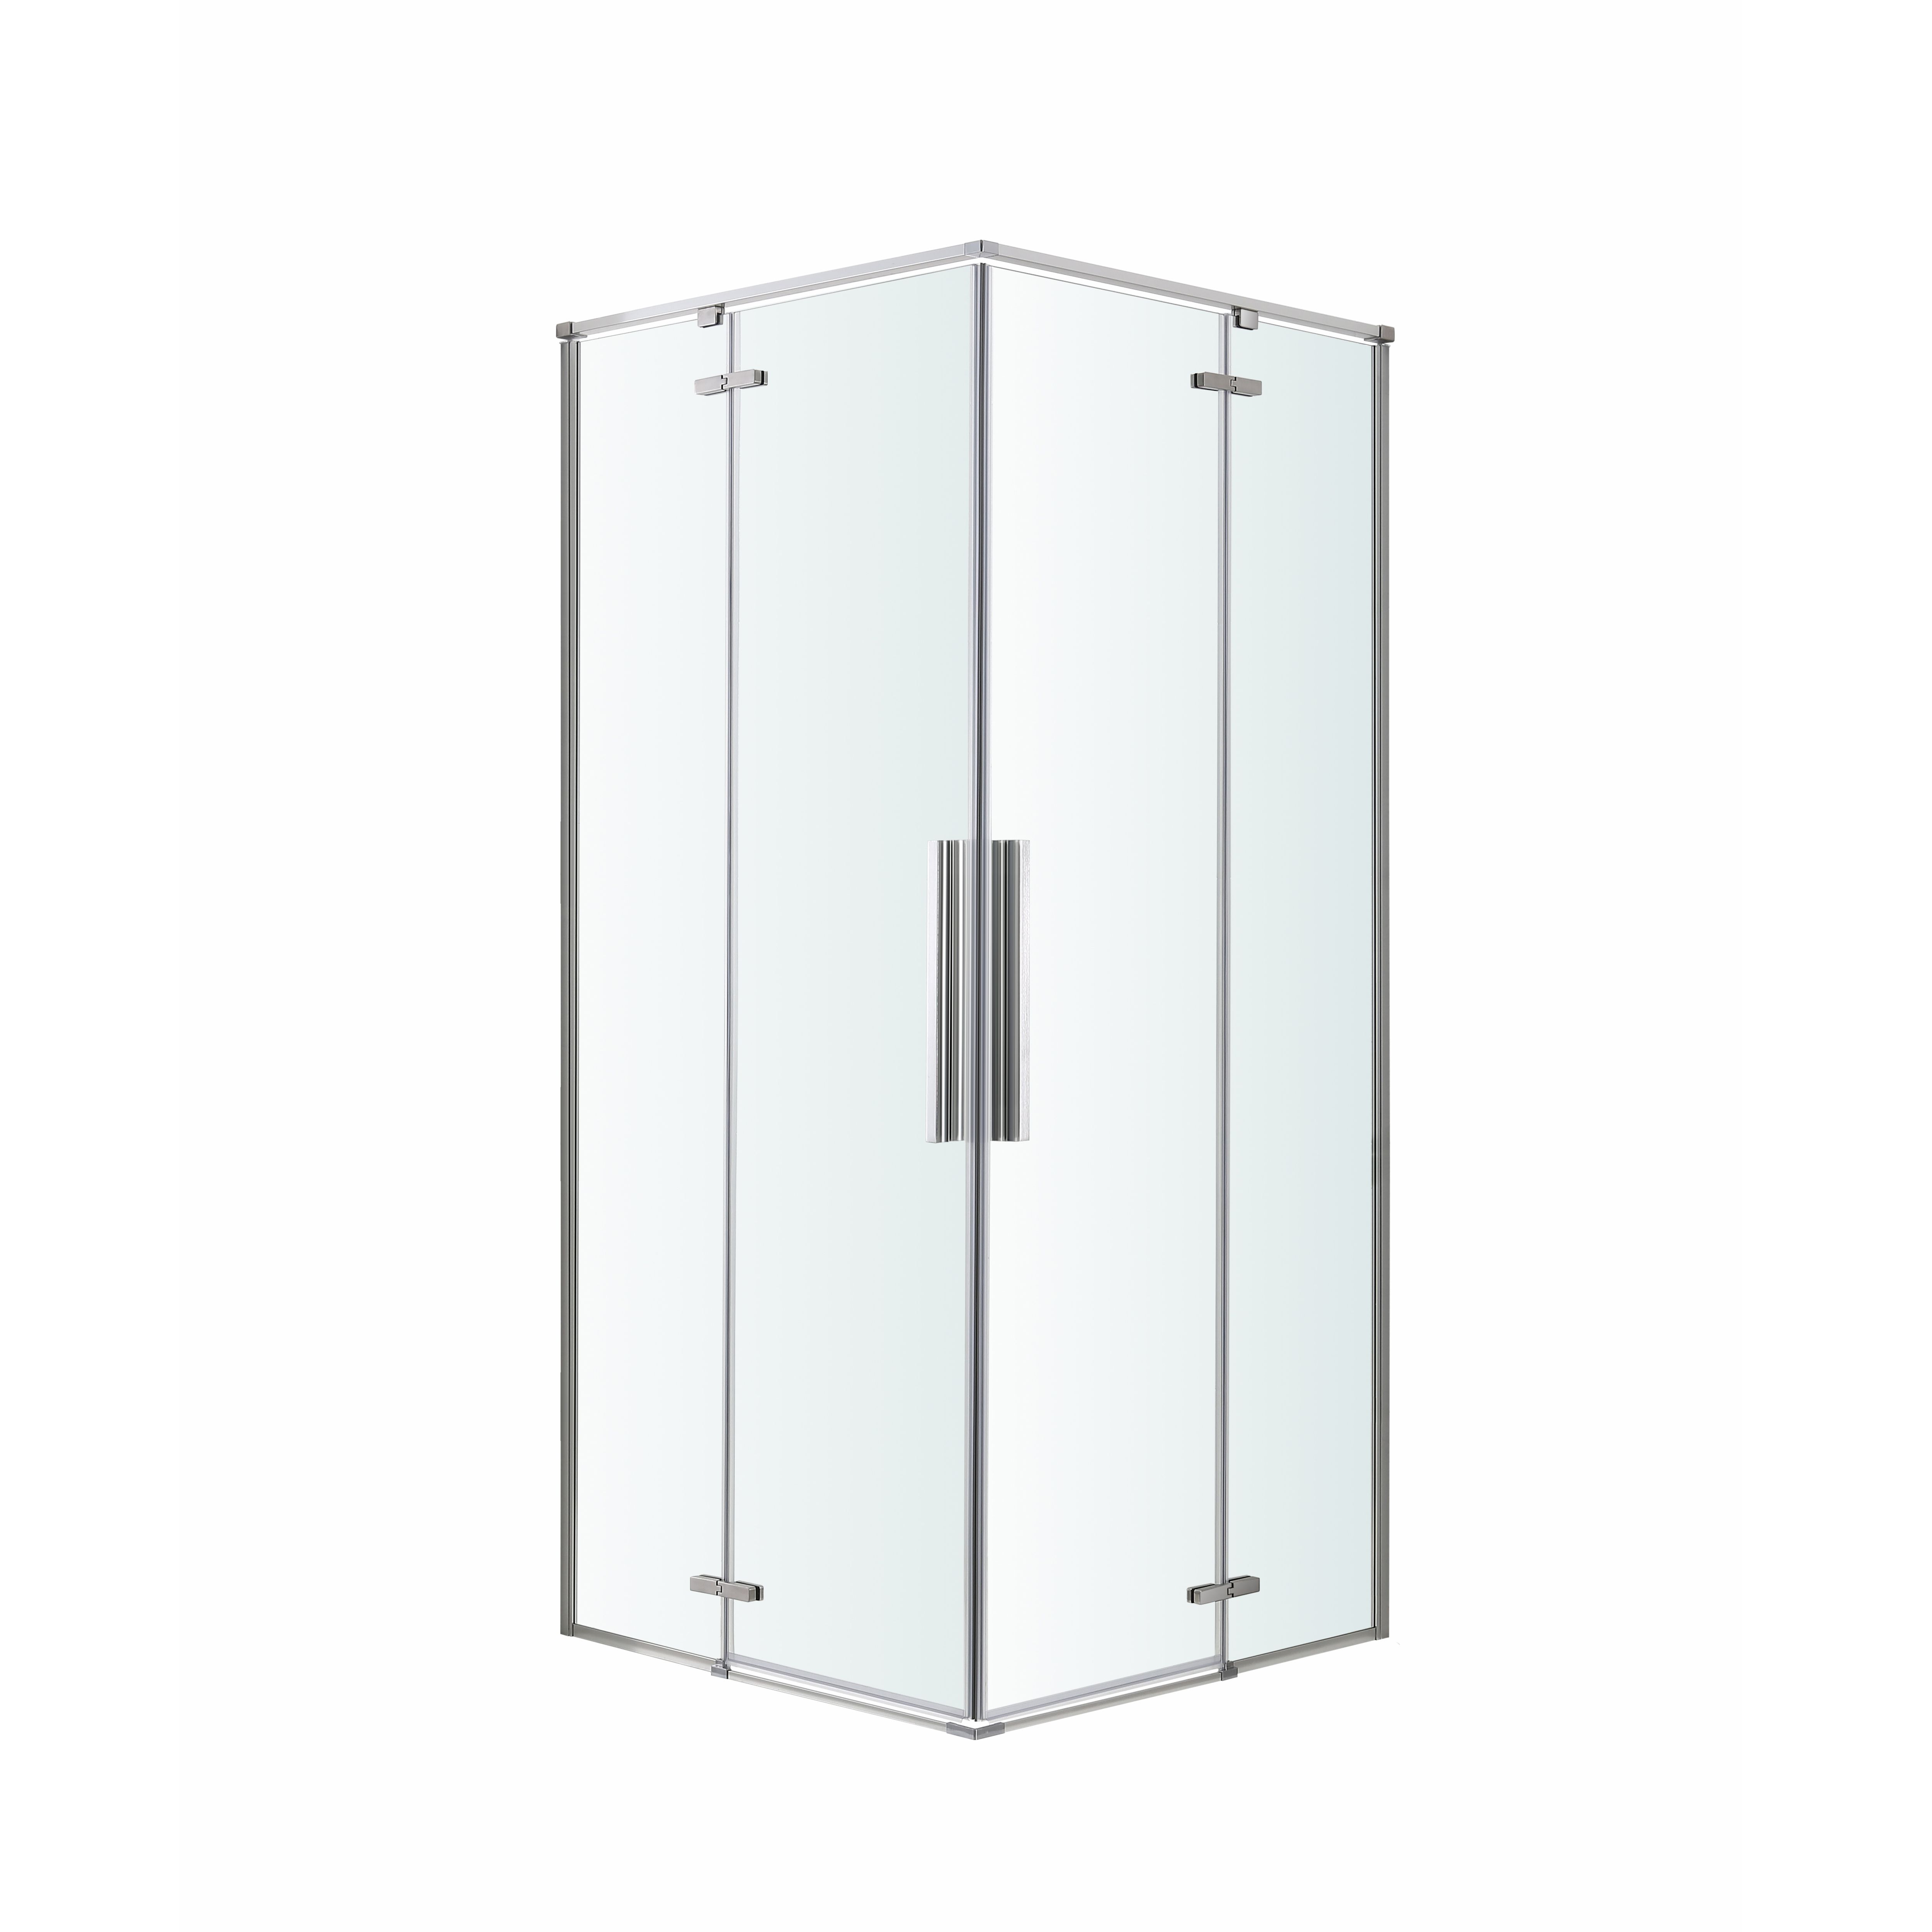 GoodHome Ezili Clear Silver effect Universal Corner Shower enclosure with Hinged door (W)79cm (D)79cm